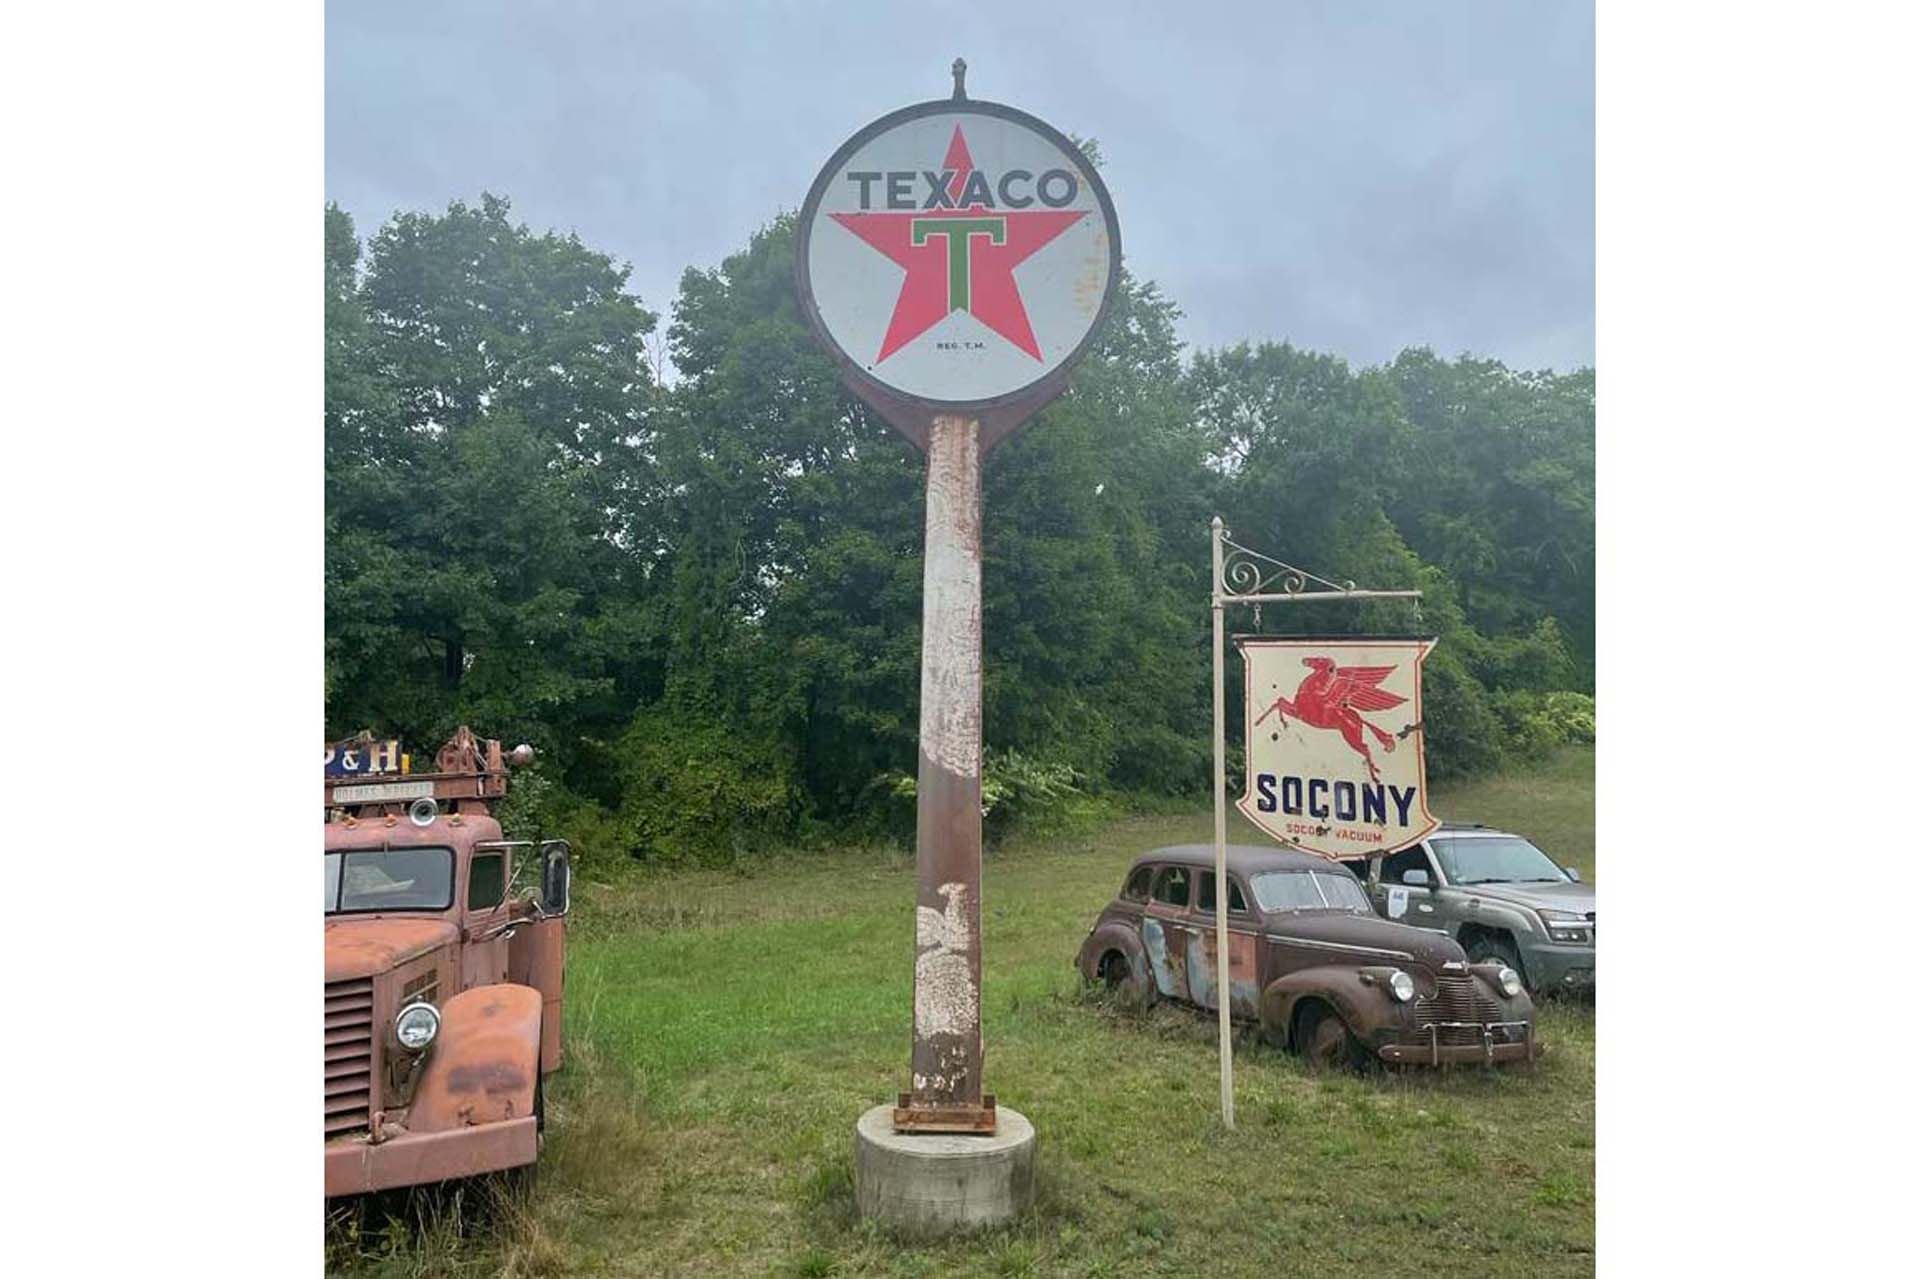 Broad Arrow Auctions | Very Large Texaco Service Station Double-Sided Porcelain Sign